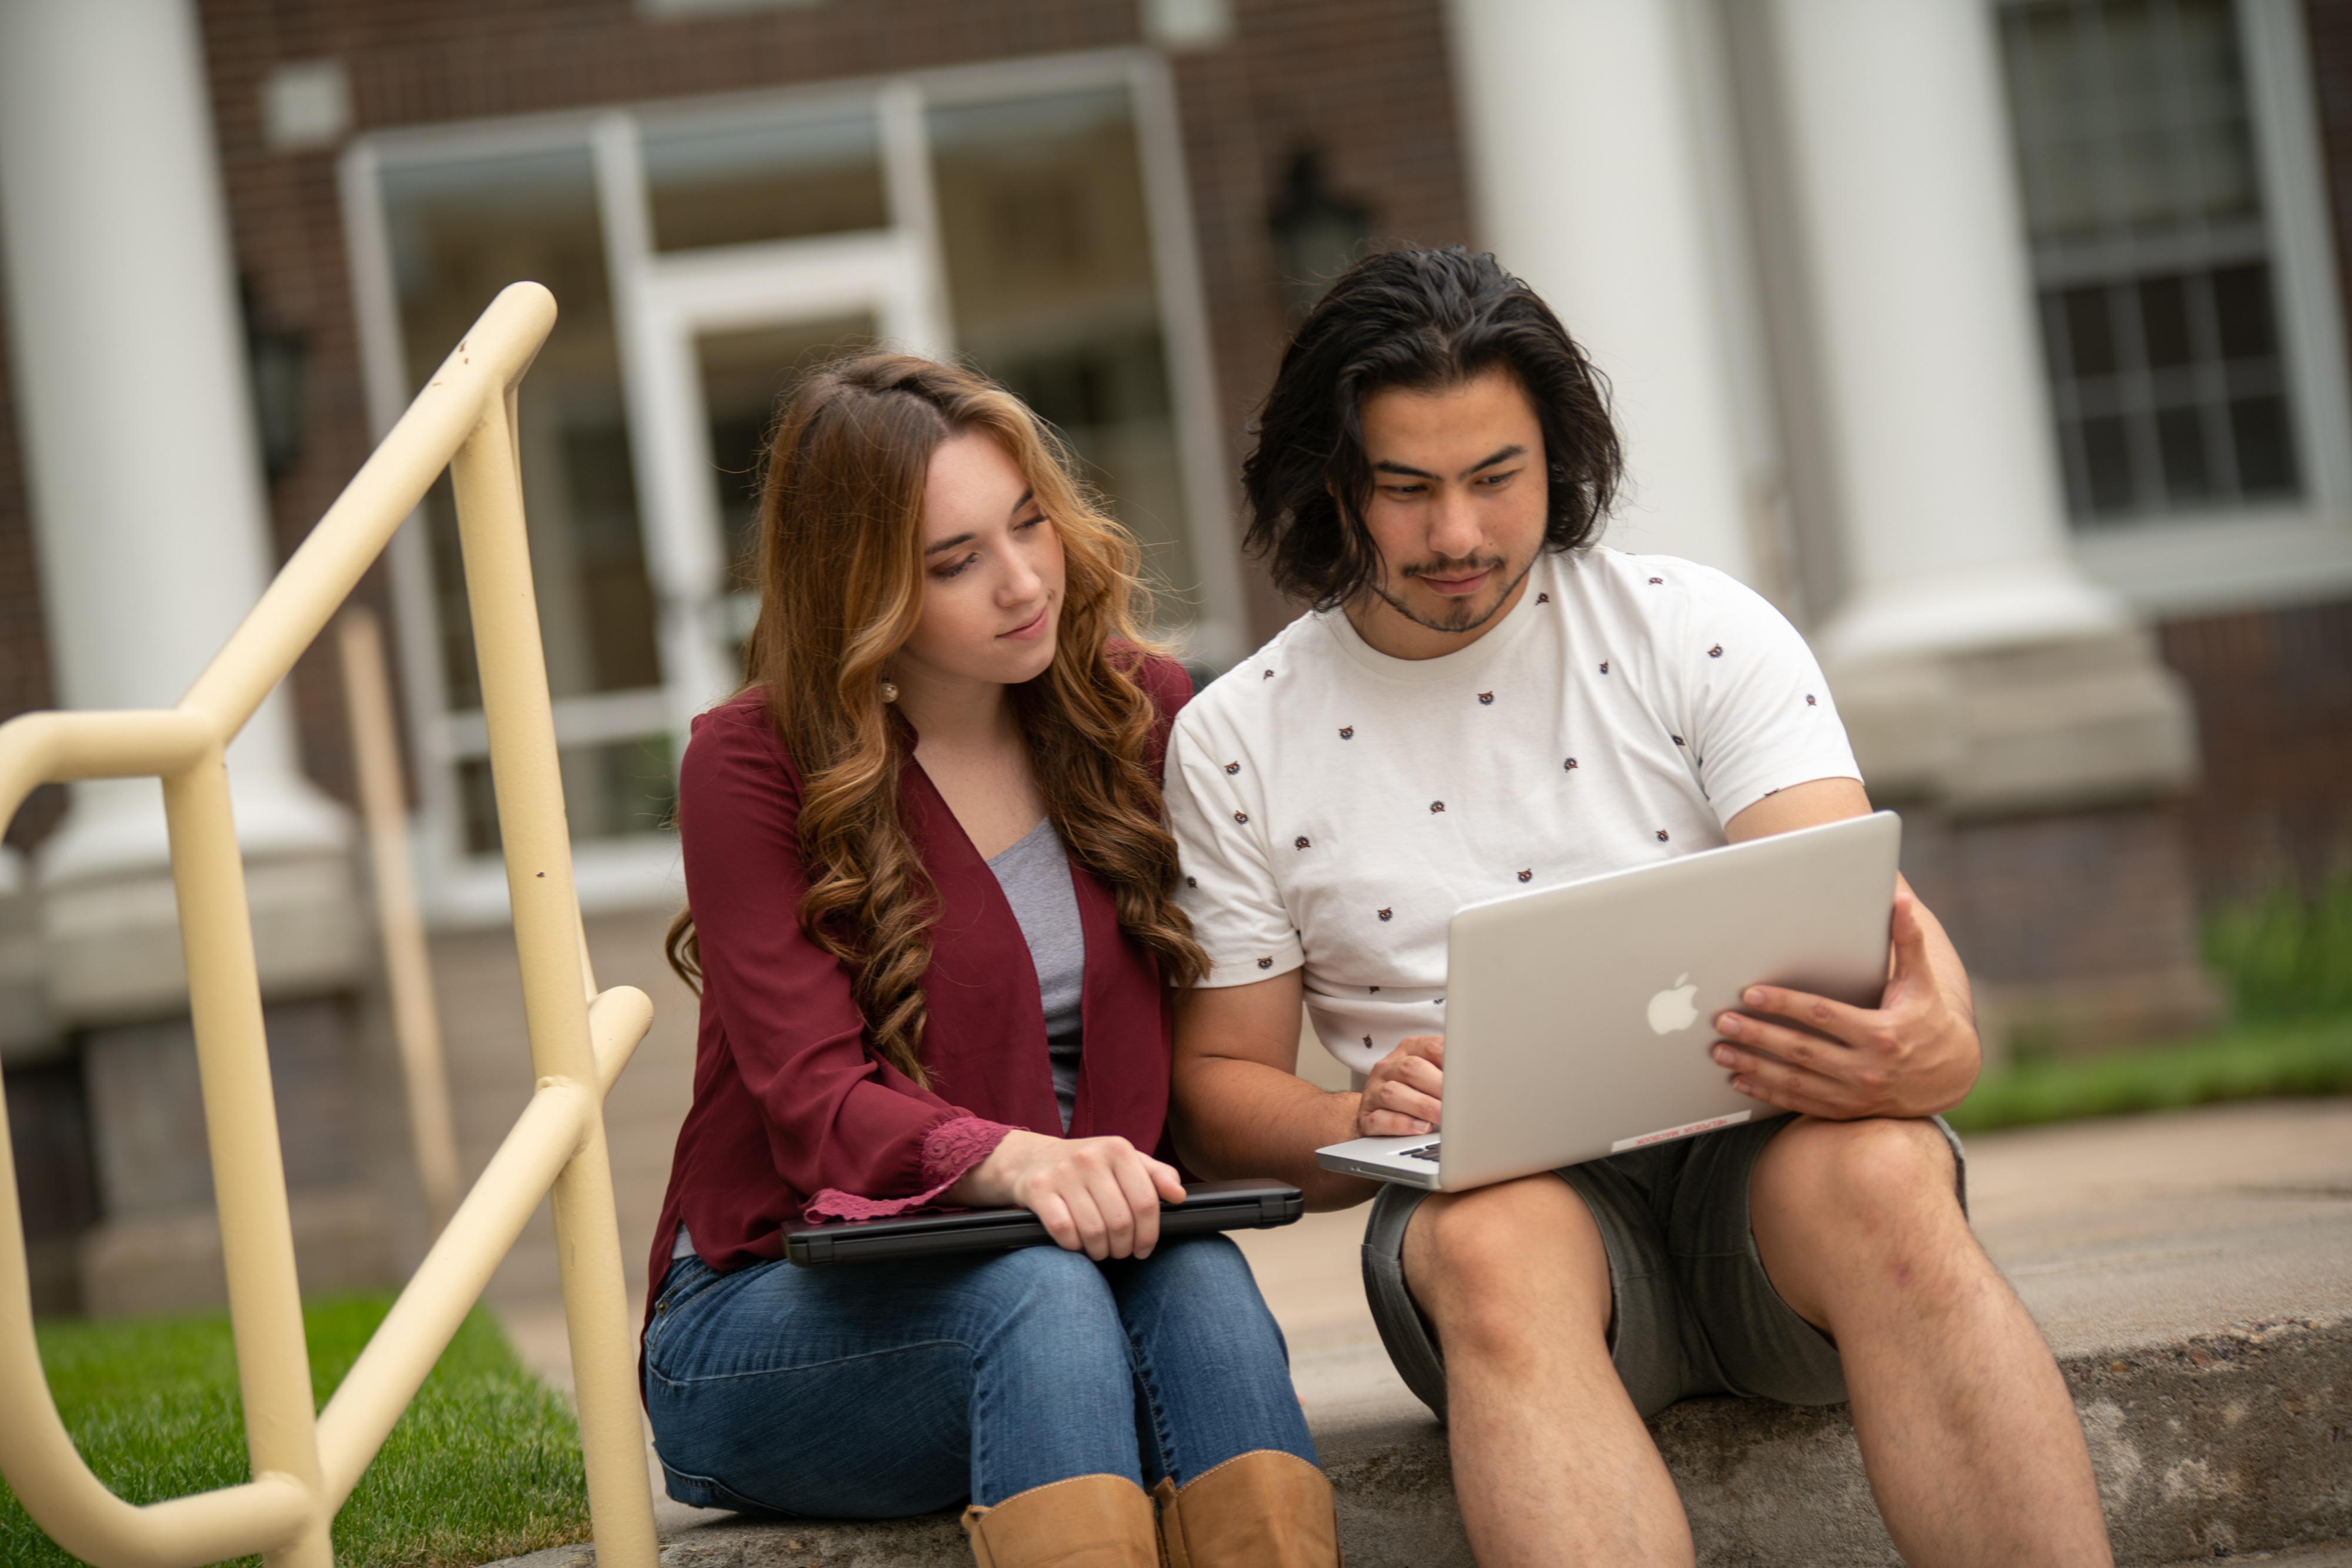 Two students seated outdoors looking at a laptop